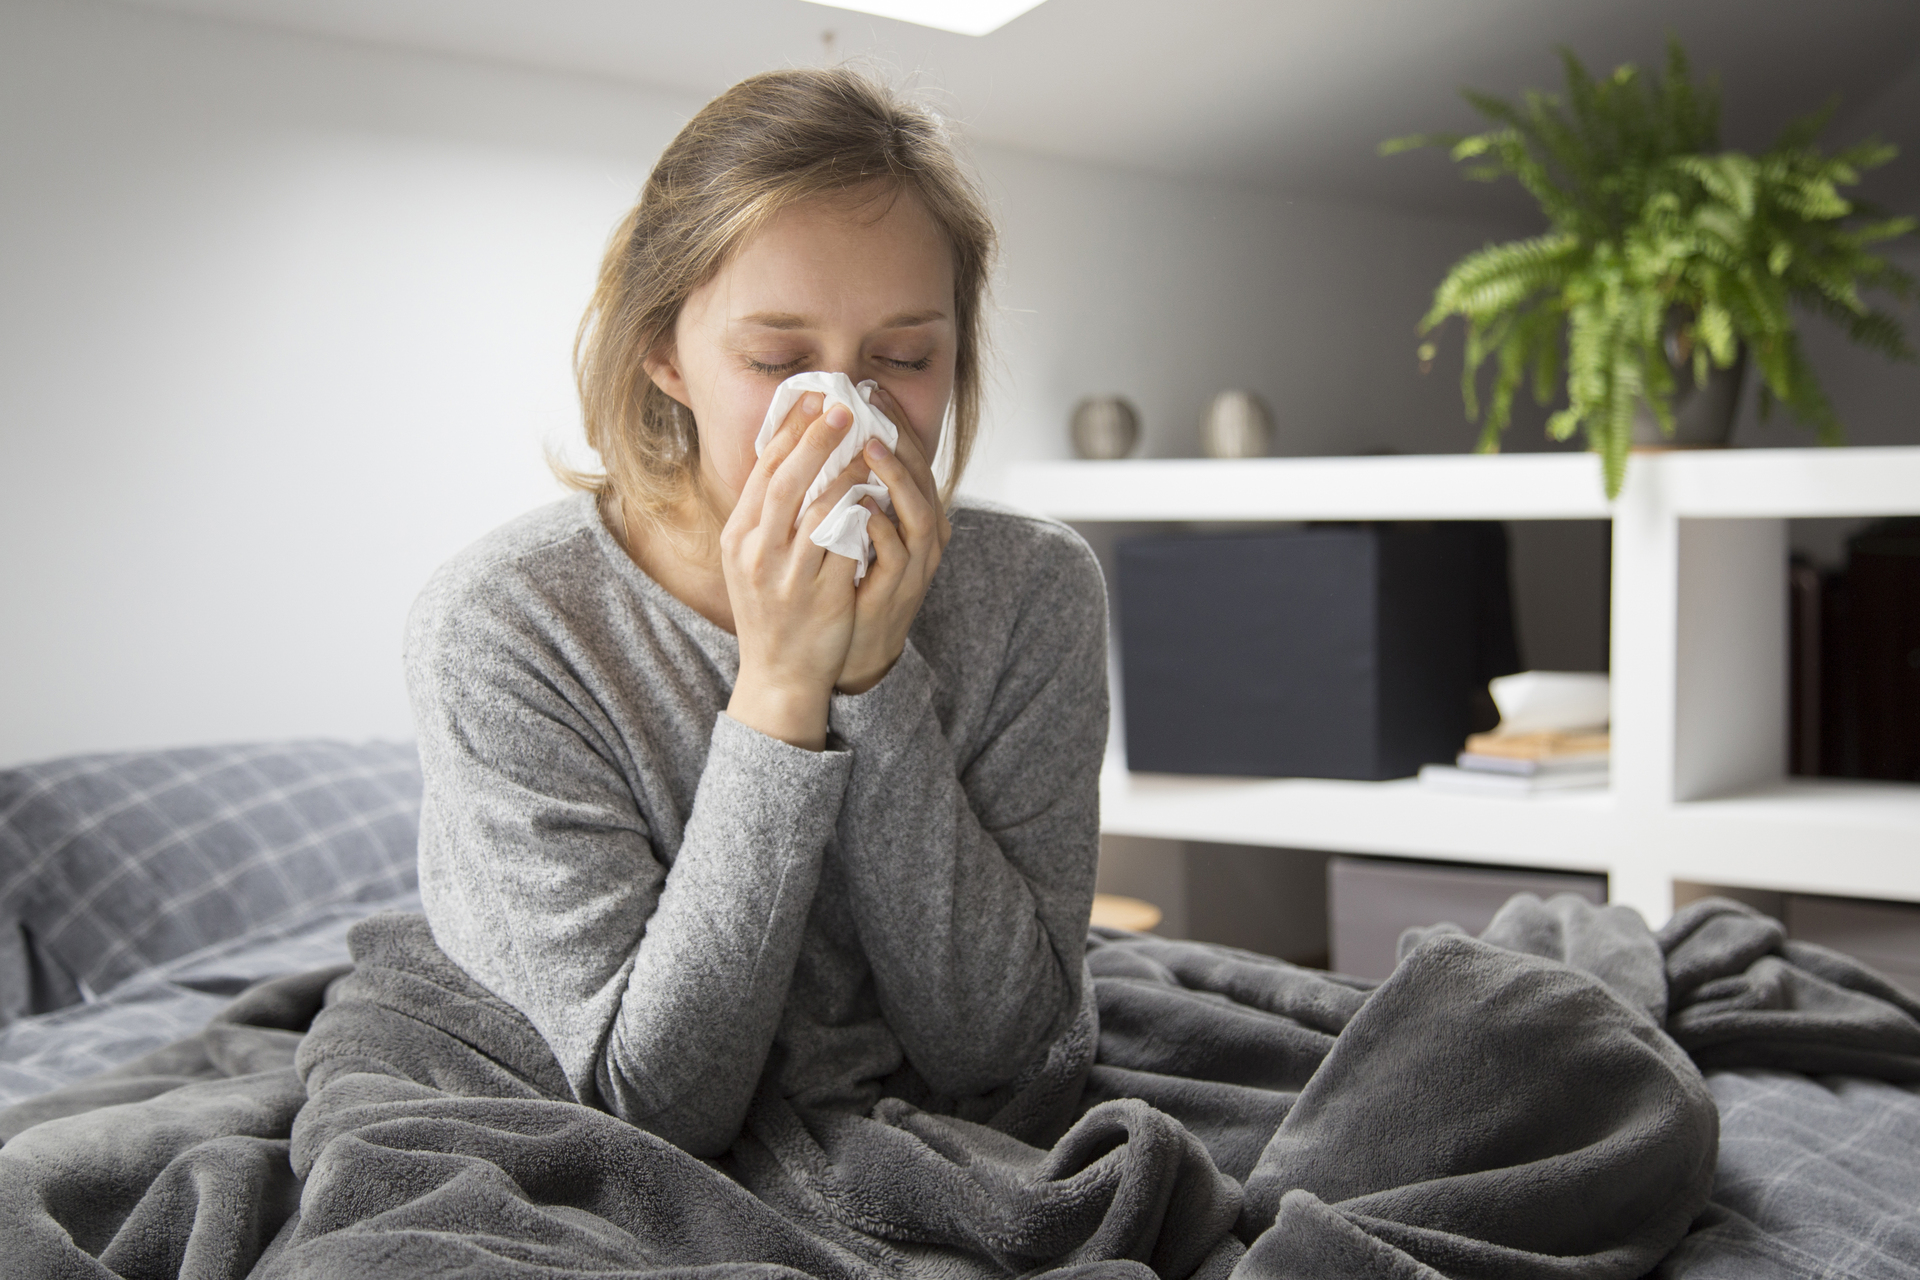 Sick young Caucasian woman covered with grey blanket sitting on bed with closed eyes, blowing nose with napkin. Illness, pain concept